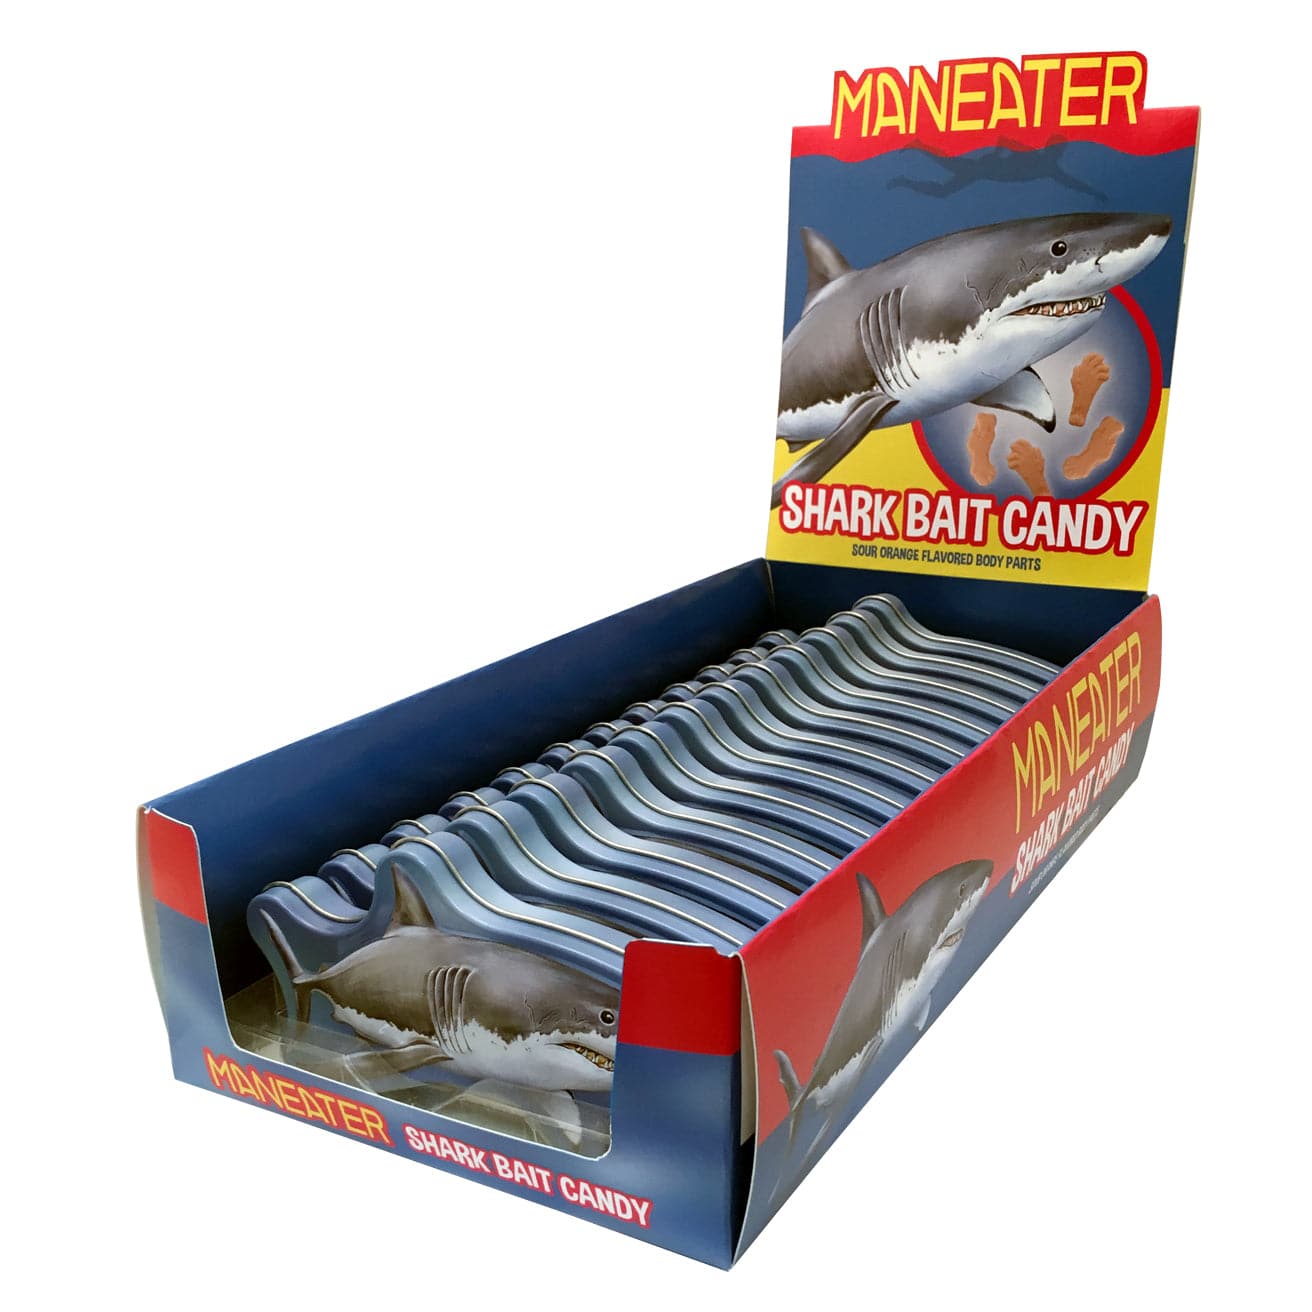 Boston America-Maneater Shark Bait Candy-5856-Box of 12-Legacy Toys